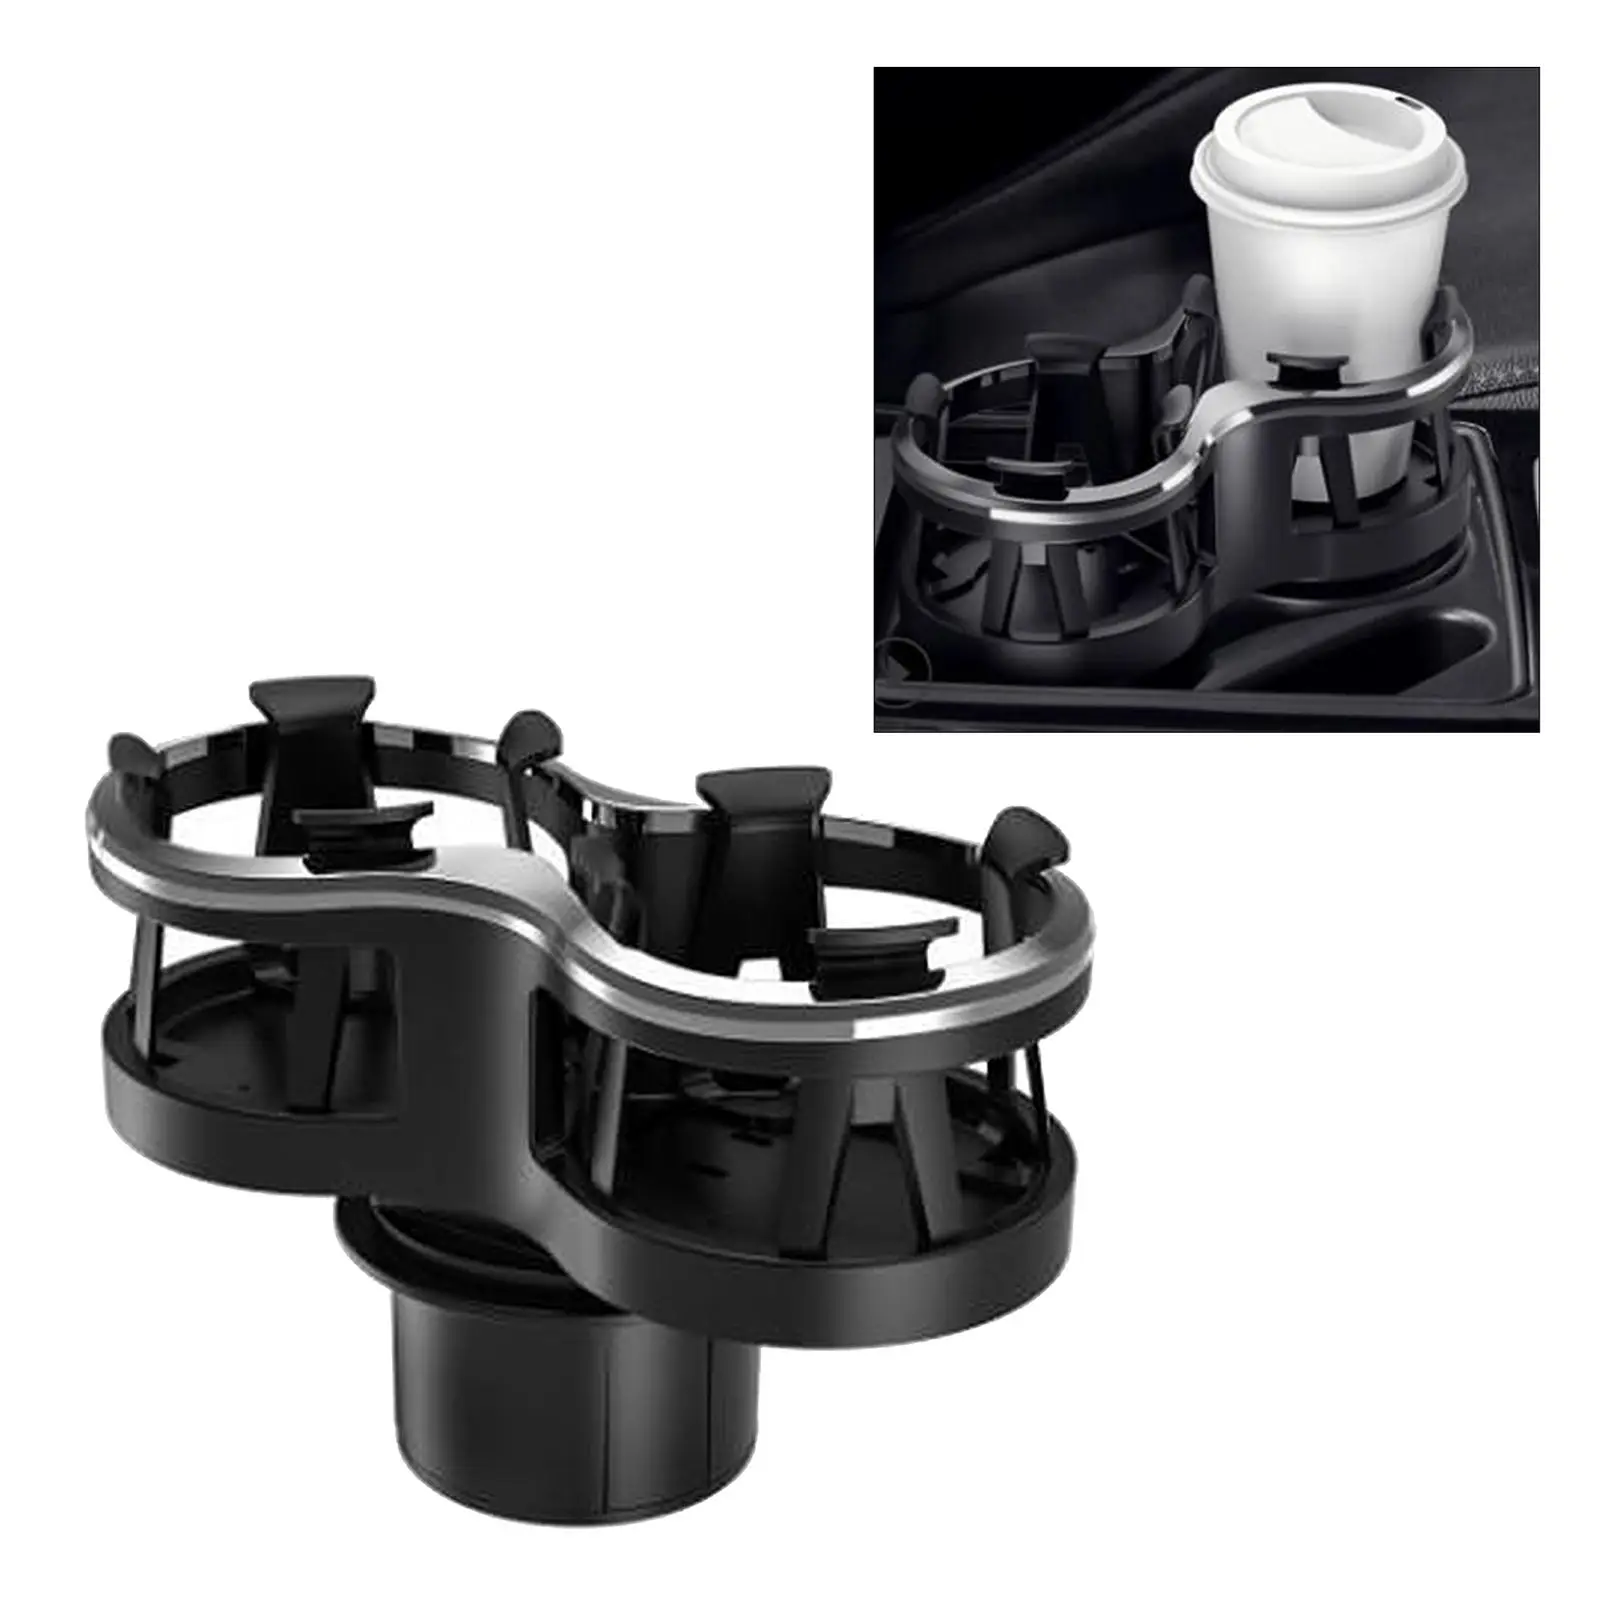 2 in 1 Design Automobile Water Bottle Holder Stand Double Hole Car Cup Holder Water Bottle Mount with Adjustable Base Universal